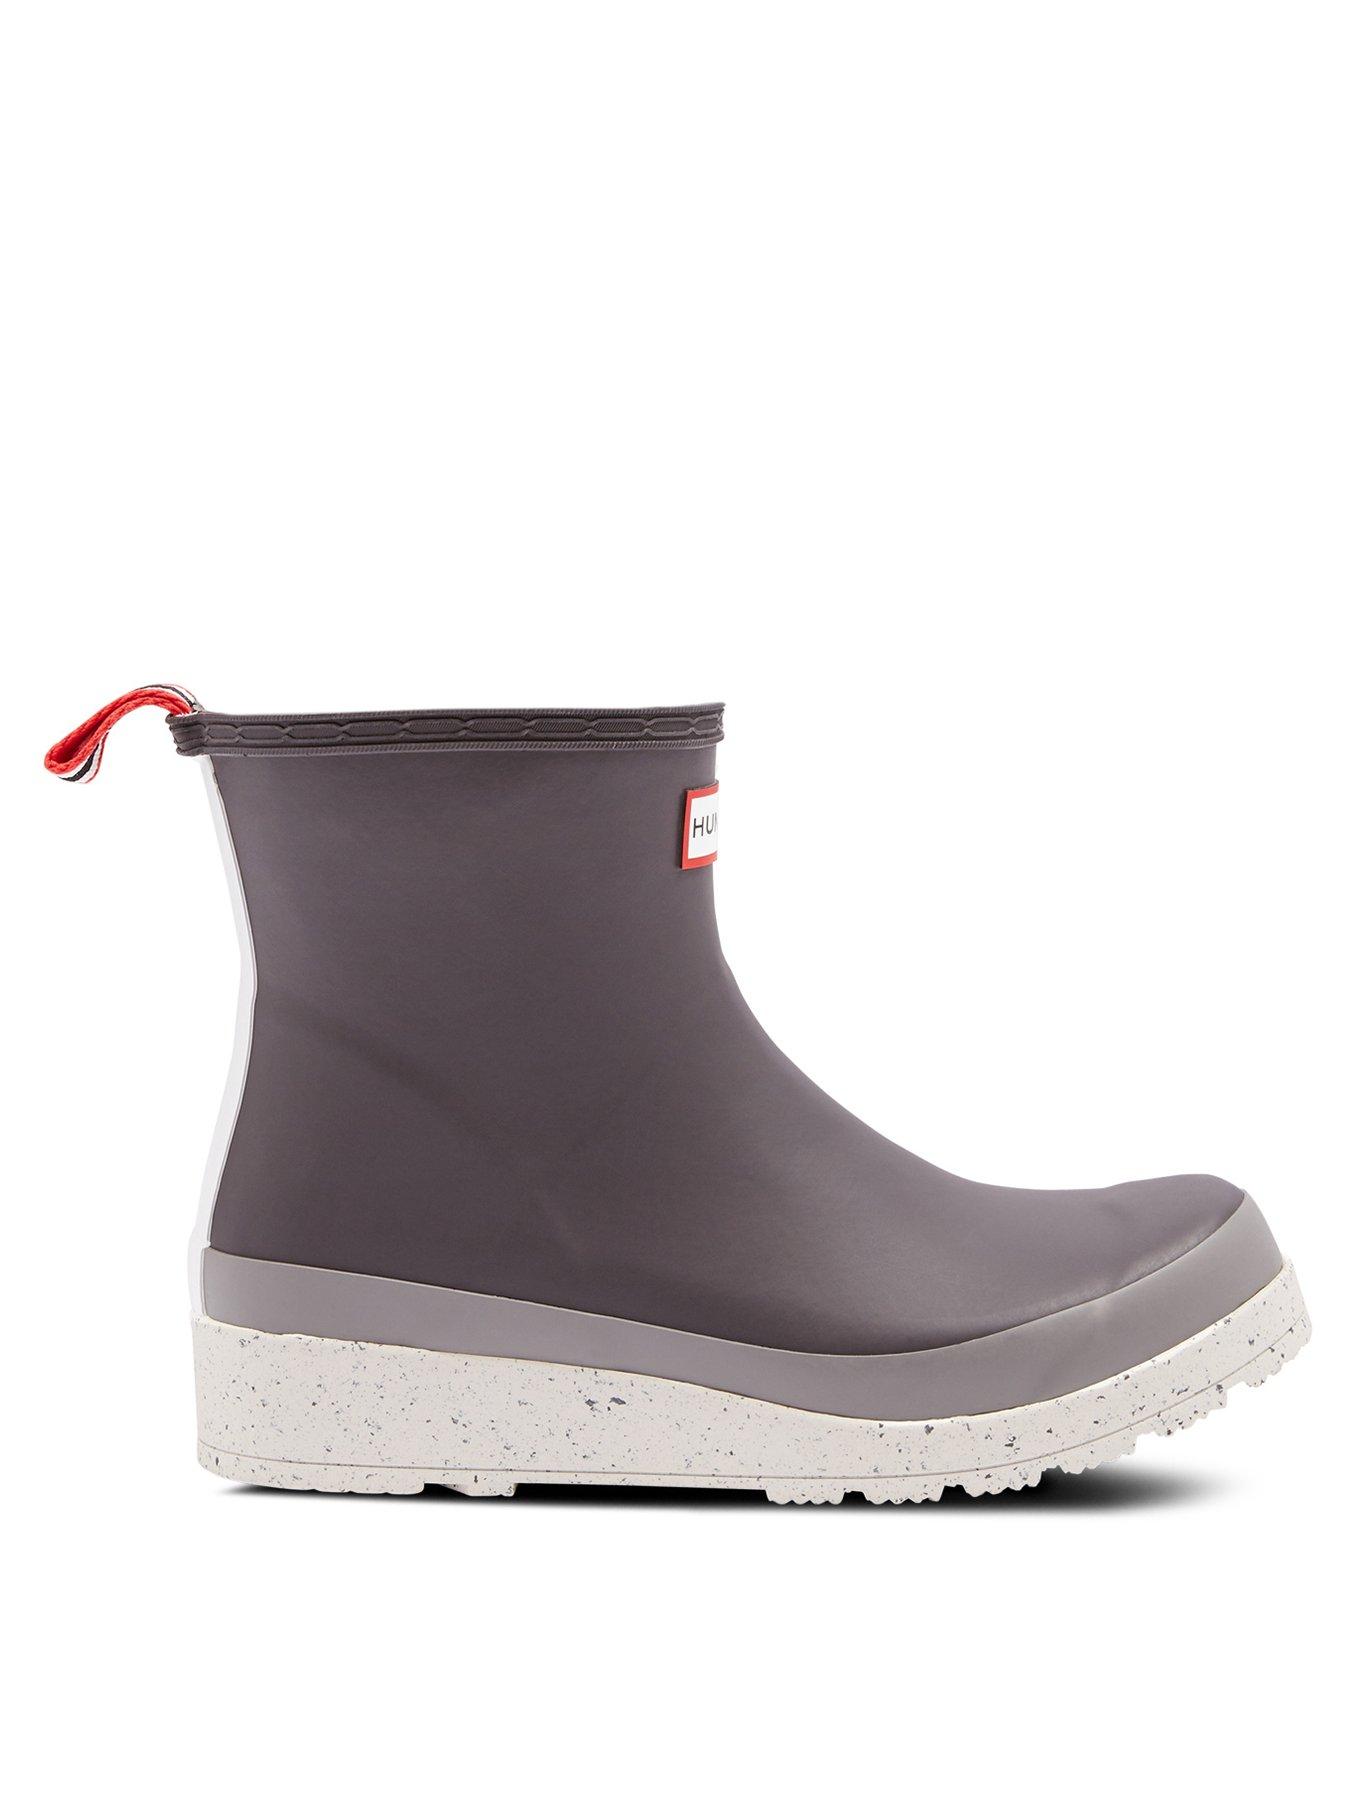 Hunter Play Short Speckle Sole Onyx Wellington Boots - Grey | very.co.uk